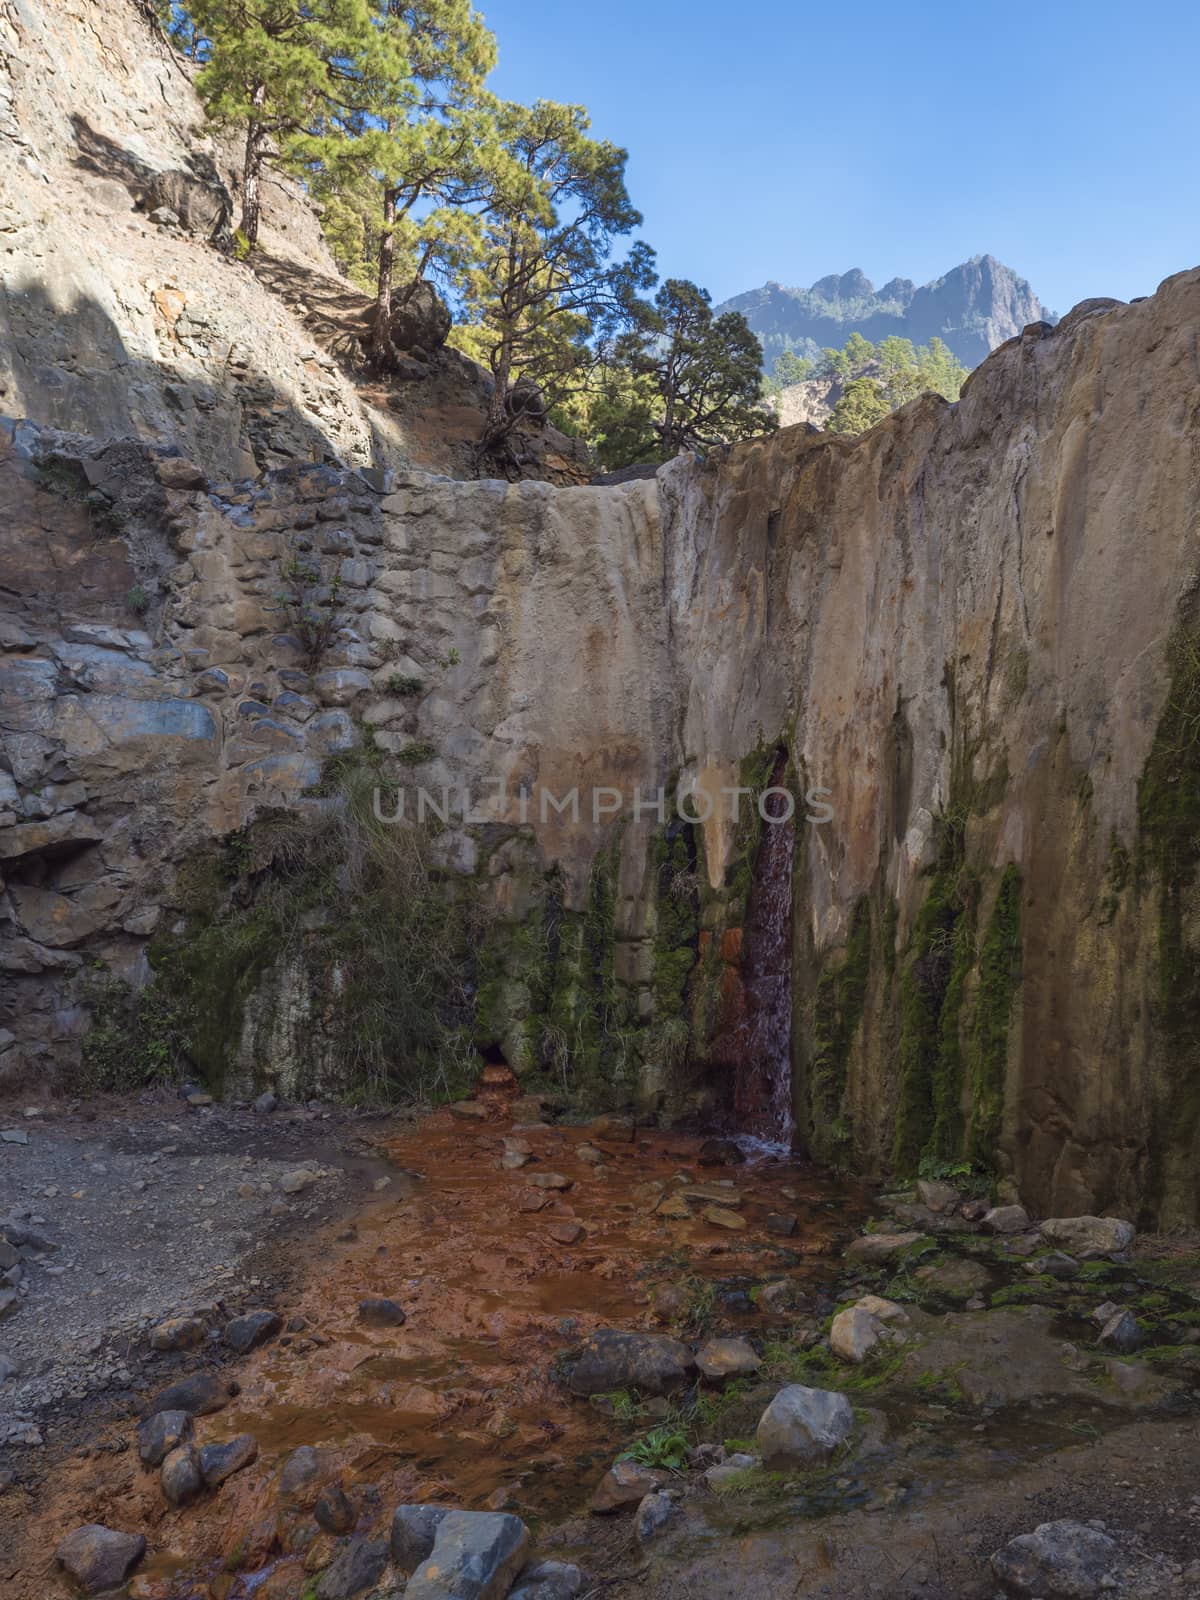 Cascada de Colores small allmost dry waterfall in a volcanic crater at Caldera de Taburiente, water stream is colorful colored by mineral water. La Palma, Canary Islands, Spain by Henkeova